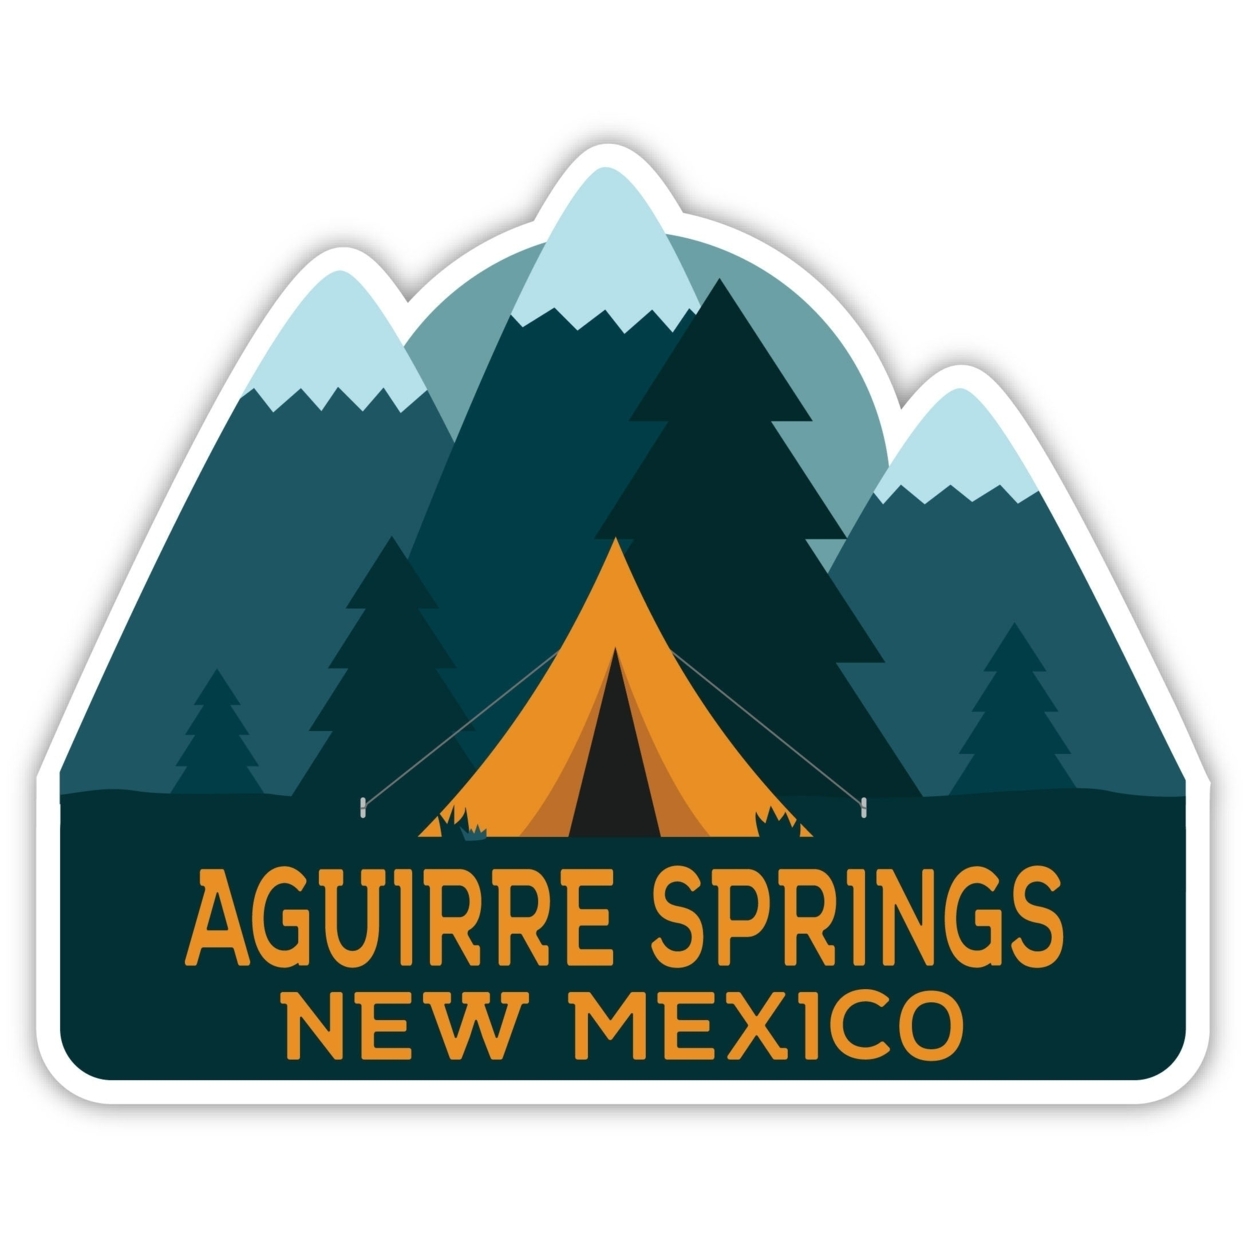 Aguirre Springs New Mexico Souvenir Decorative Stickers (Choose Theme And Size) - 4-Pack, 8-Inch, Tent